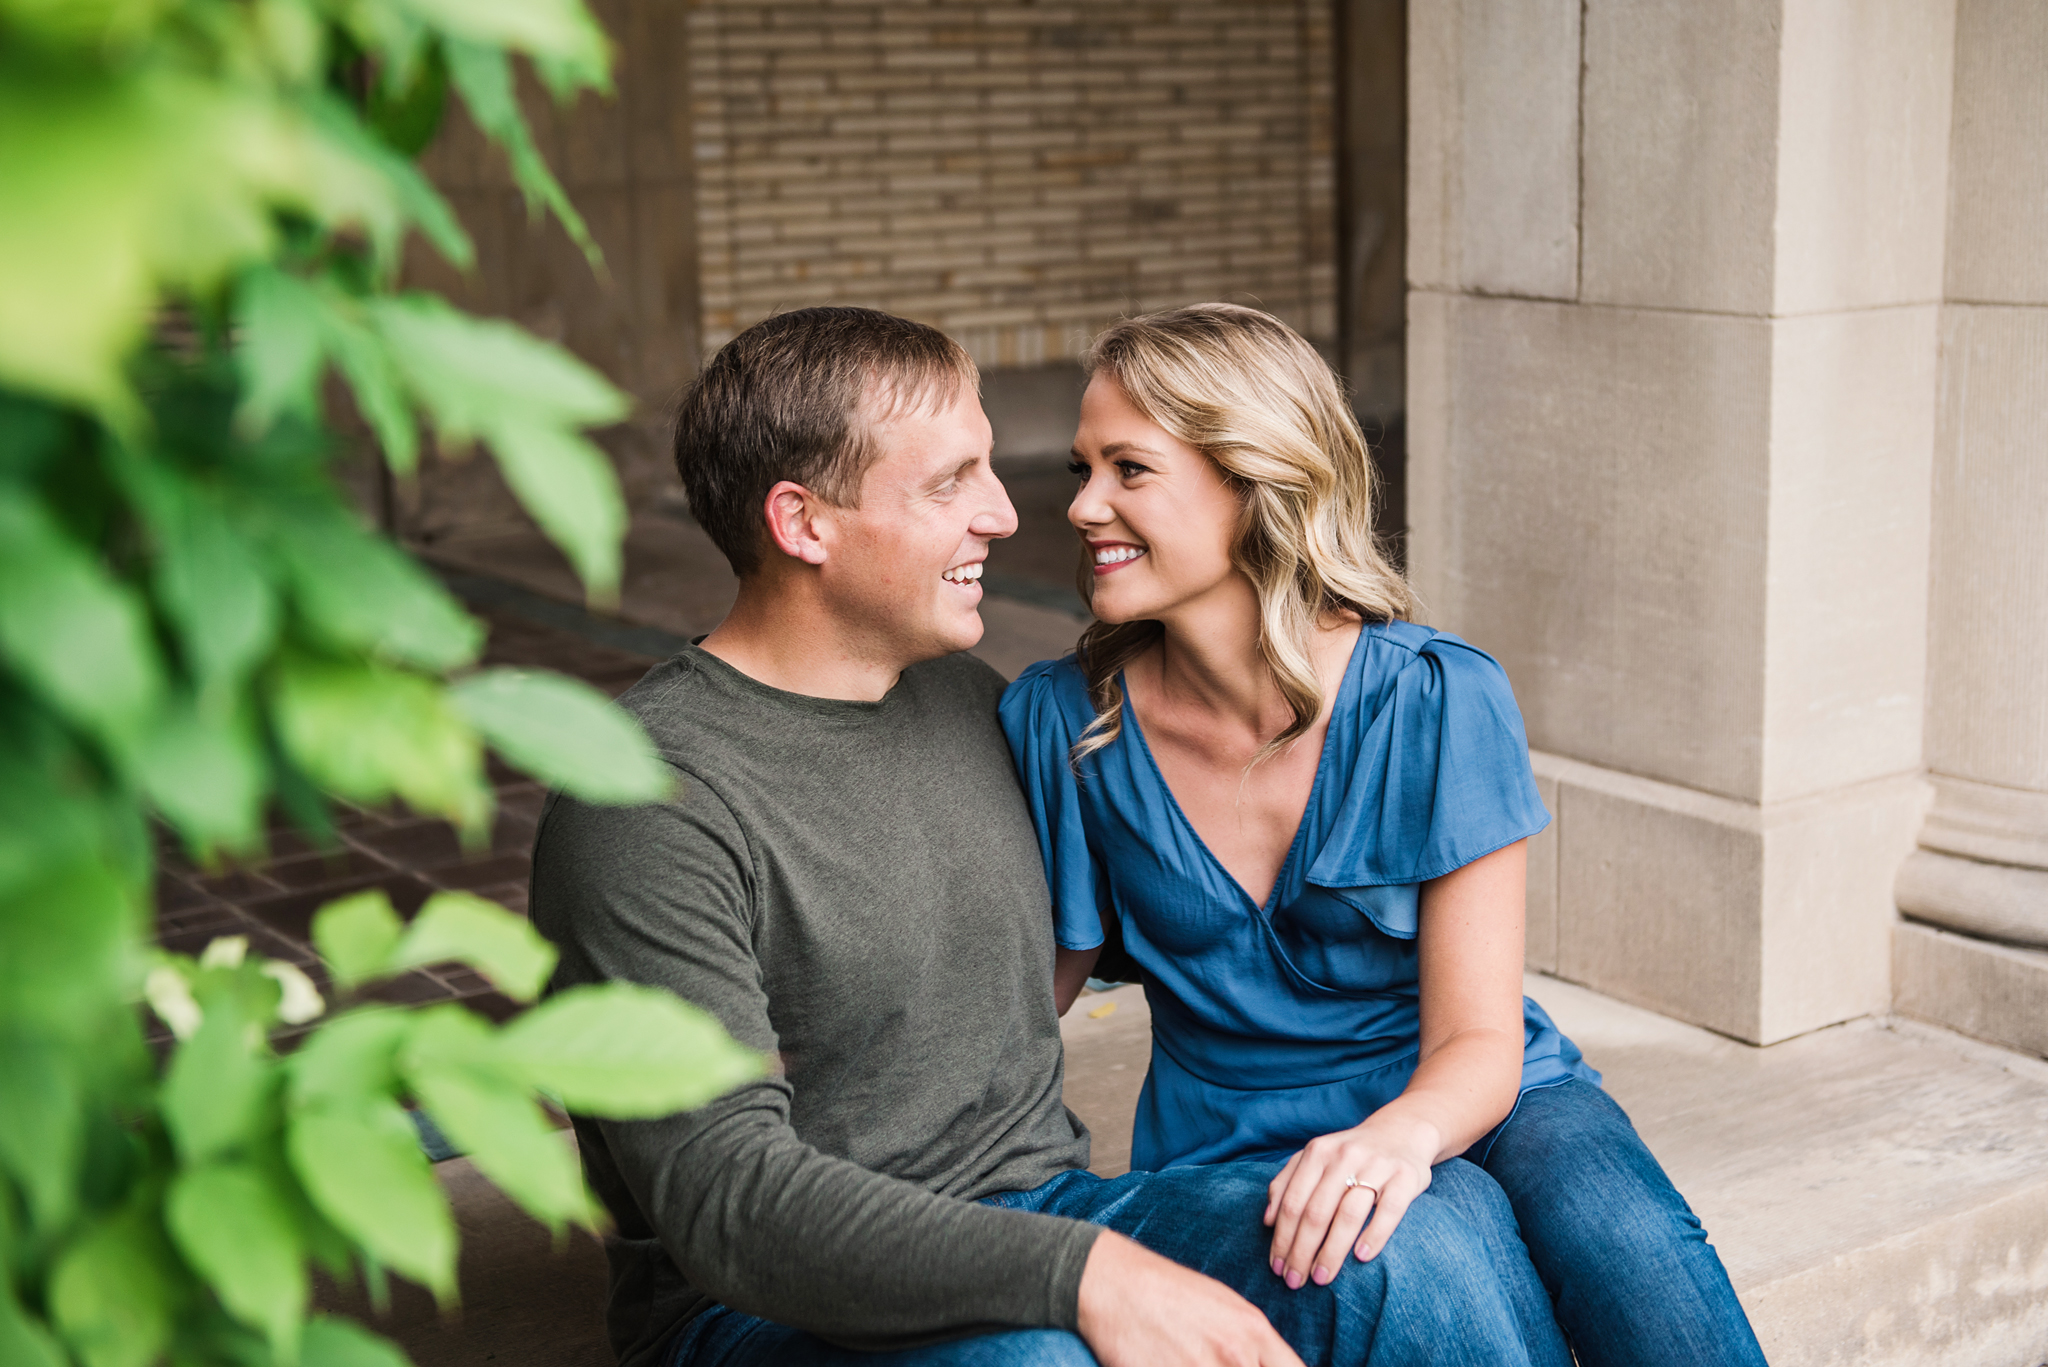 George_Eastman_House_Rochester_Yacht_Club_Rochester_Engagement_Session_JILL_STUDIO_Rochester_NY_Photographer_DSC_7983.jpg